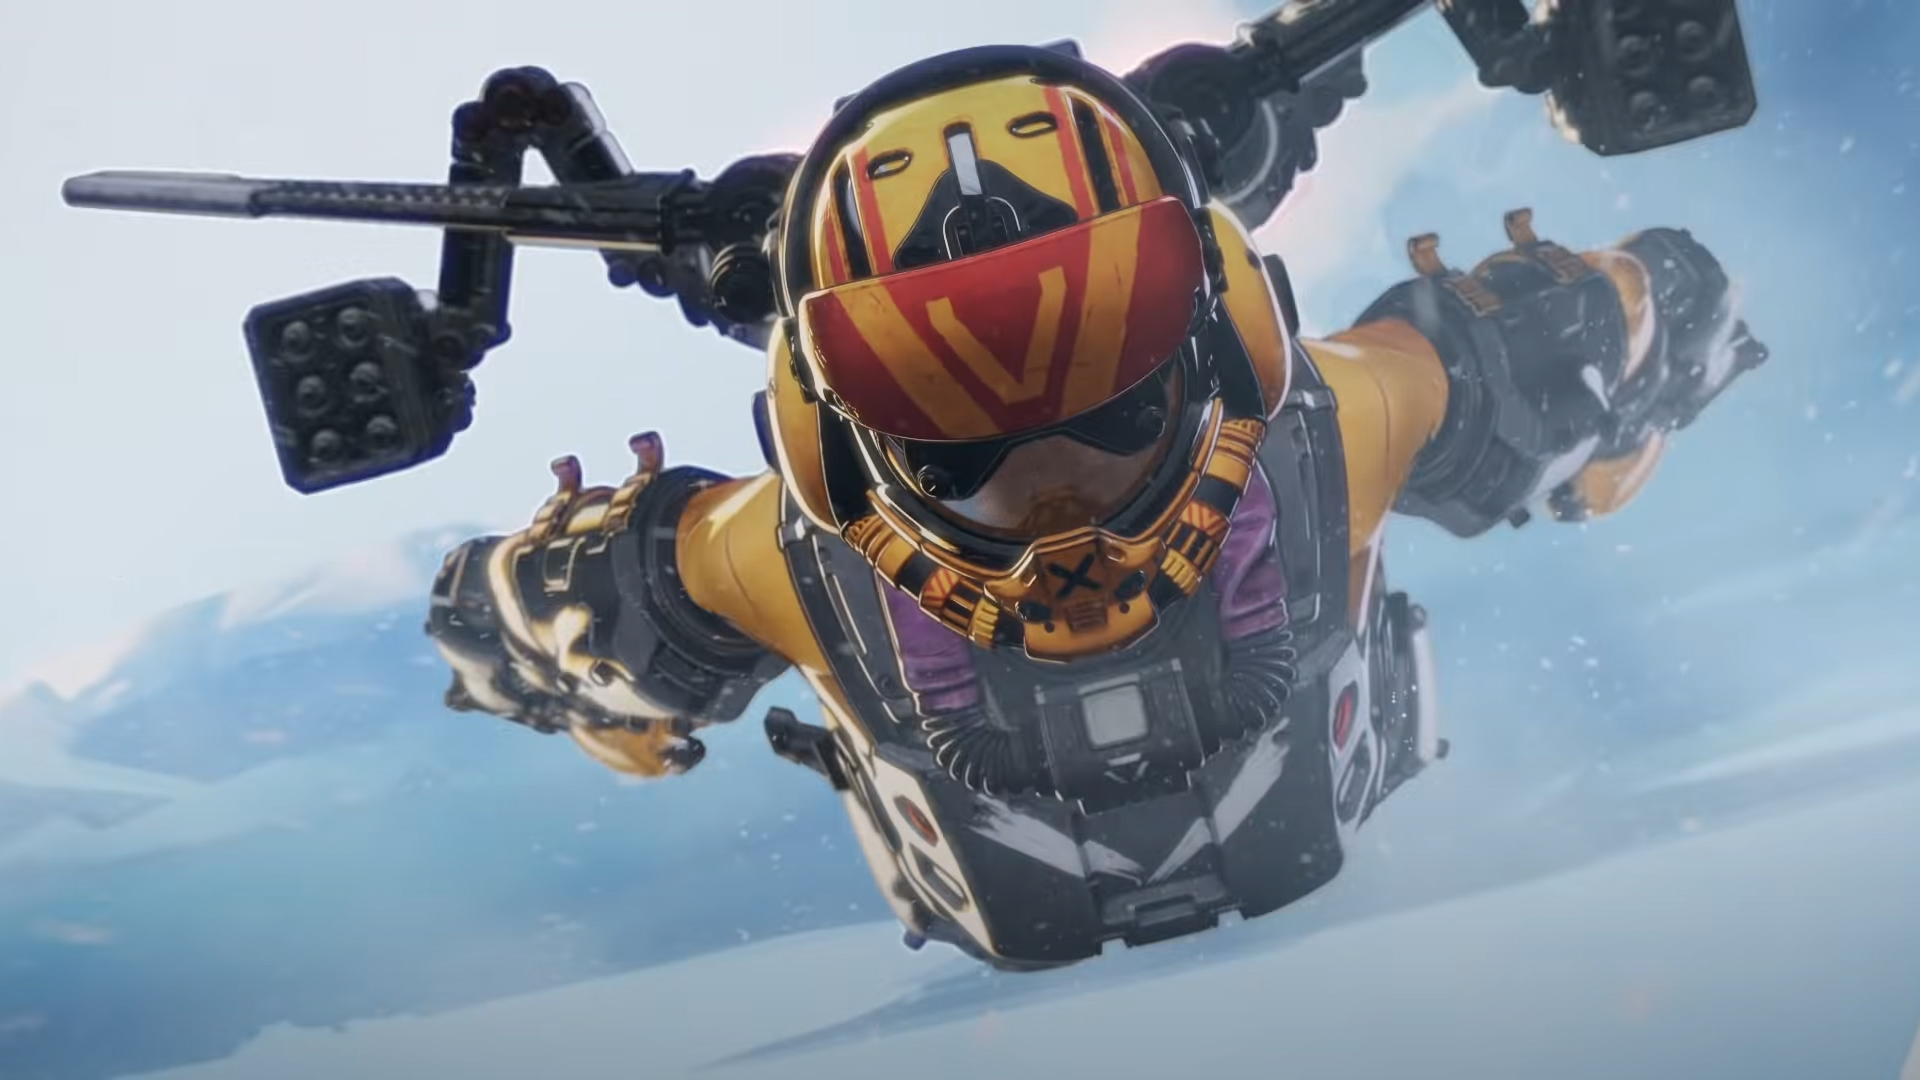 Apex Legends Season 9 Adds New Character “Valkyrie” in May, Apex